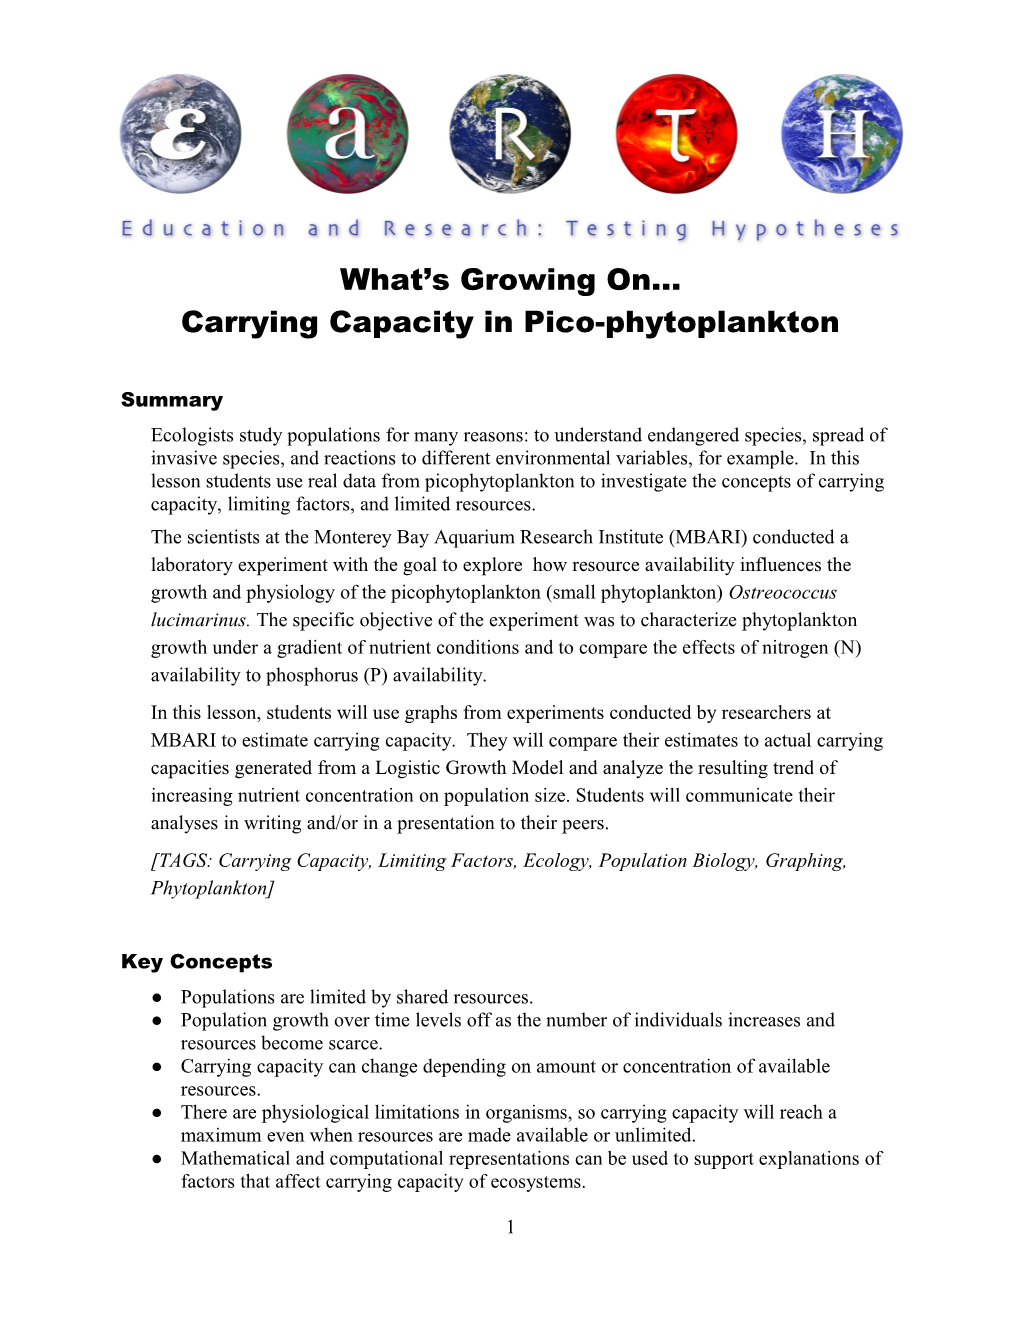 What S Growing on Carrying Capacity in Pico-Phytoplankton